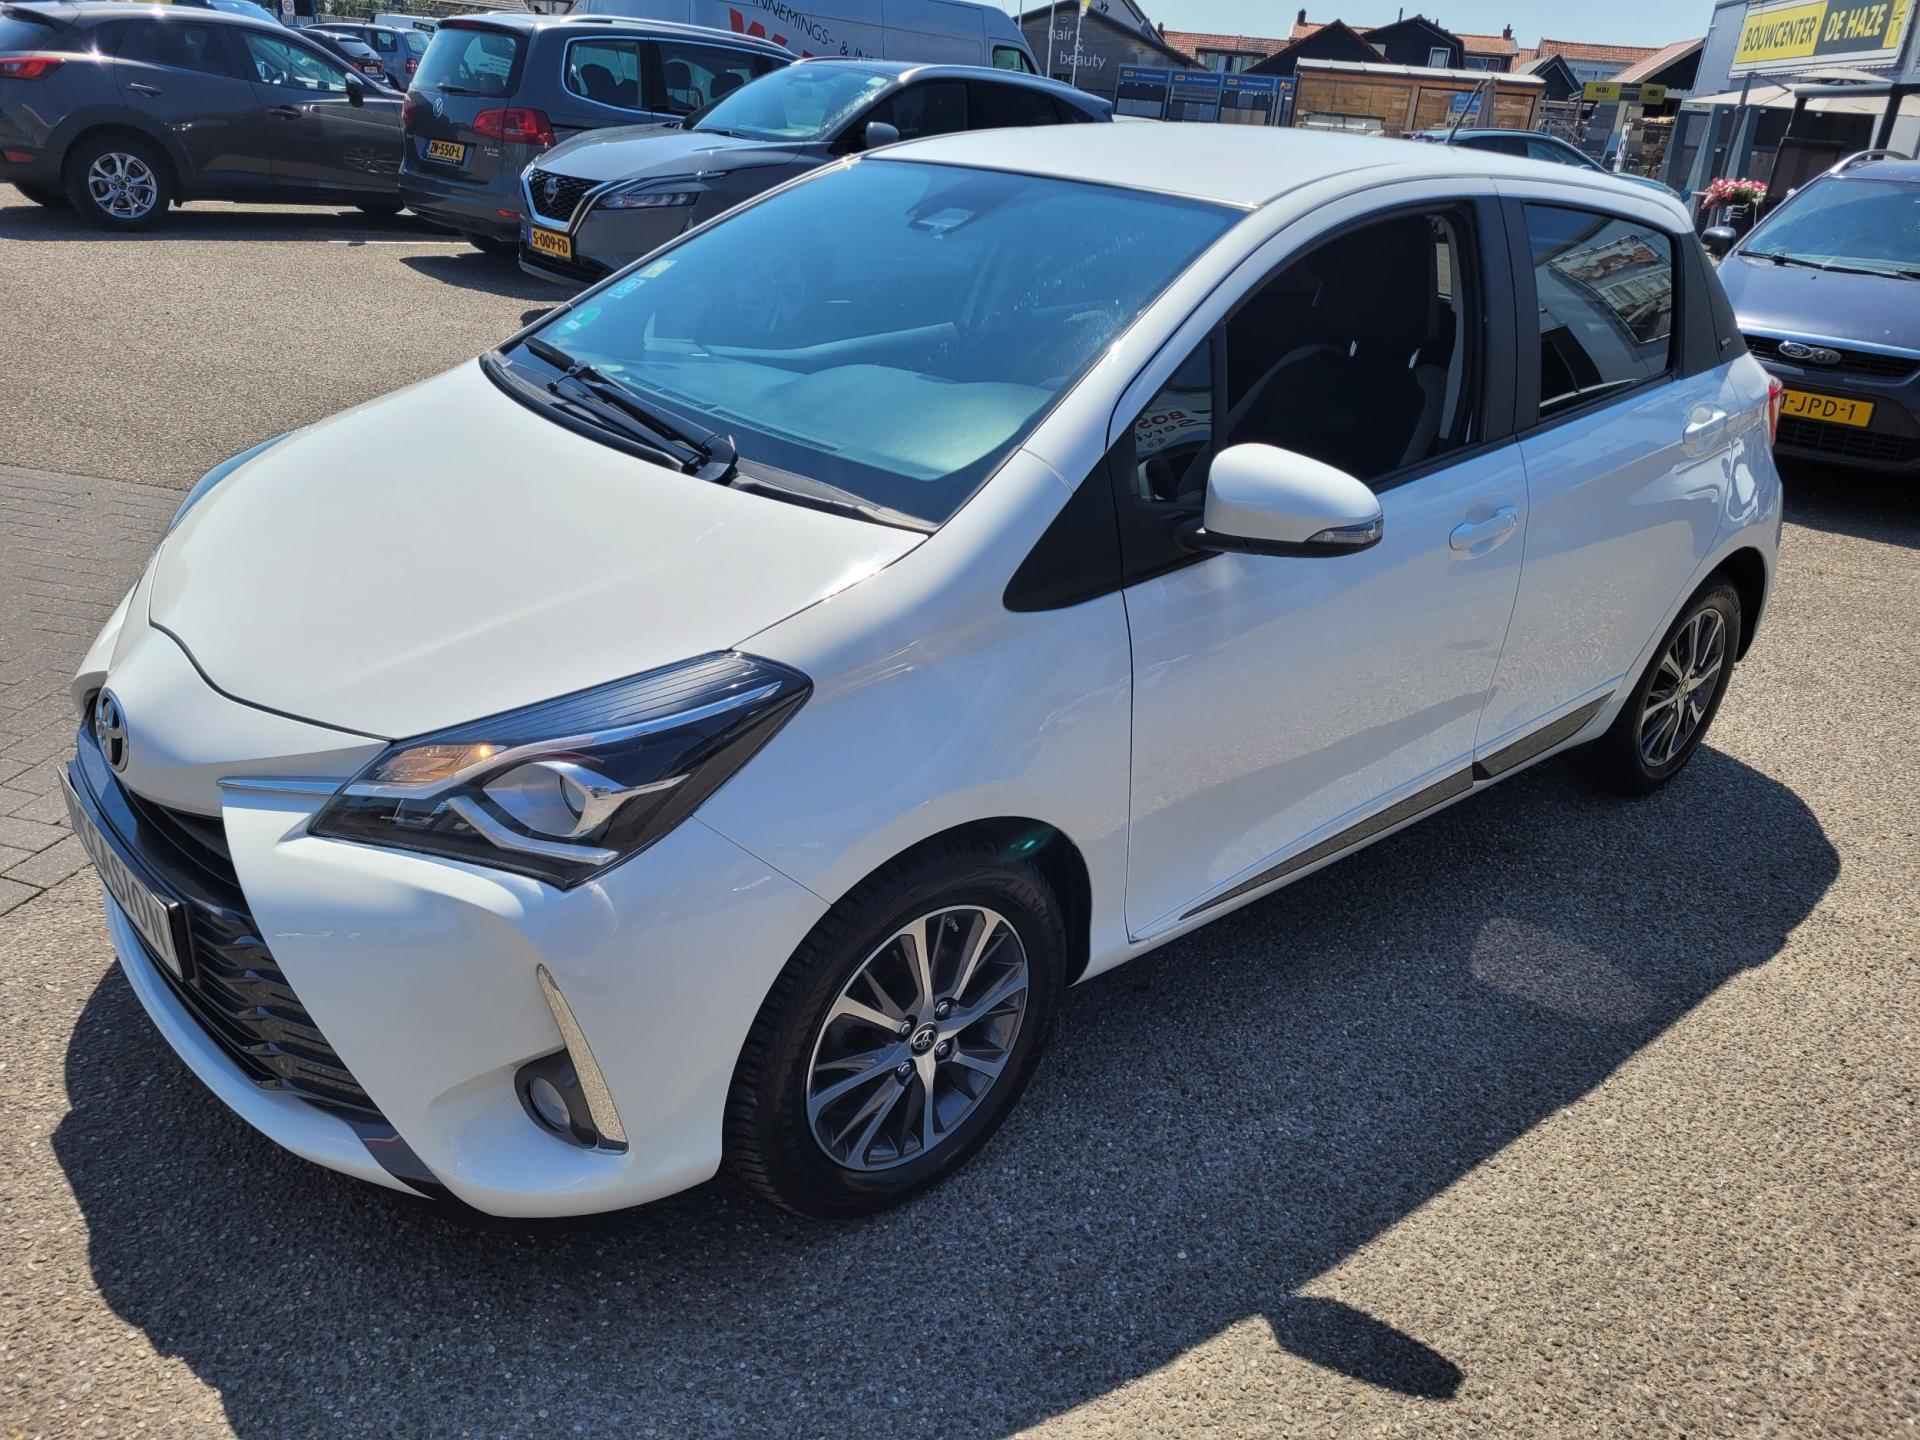 Toyota Yaris 1.5 VVT-i Dynamic Y20 AUTOMAAT / APPLE+ANDROID CAR PLAY / BTW Auto - 4/30